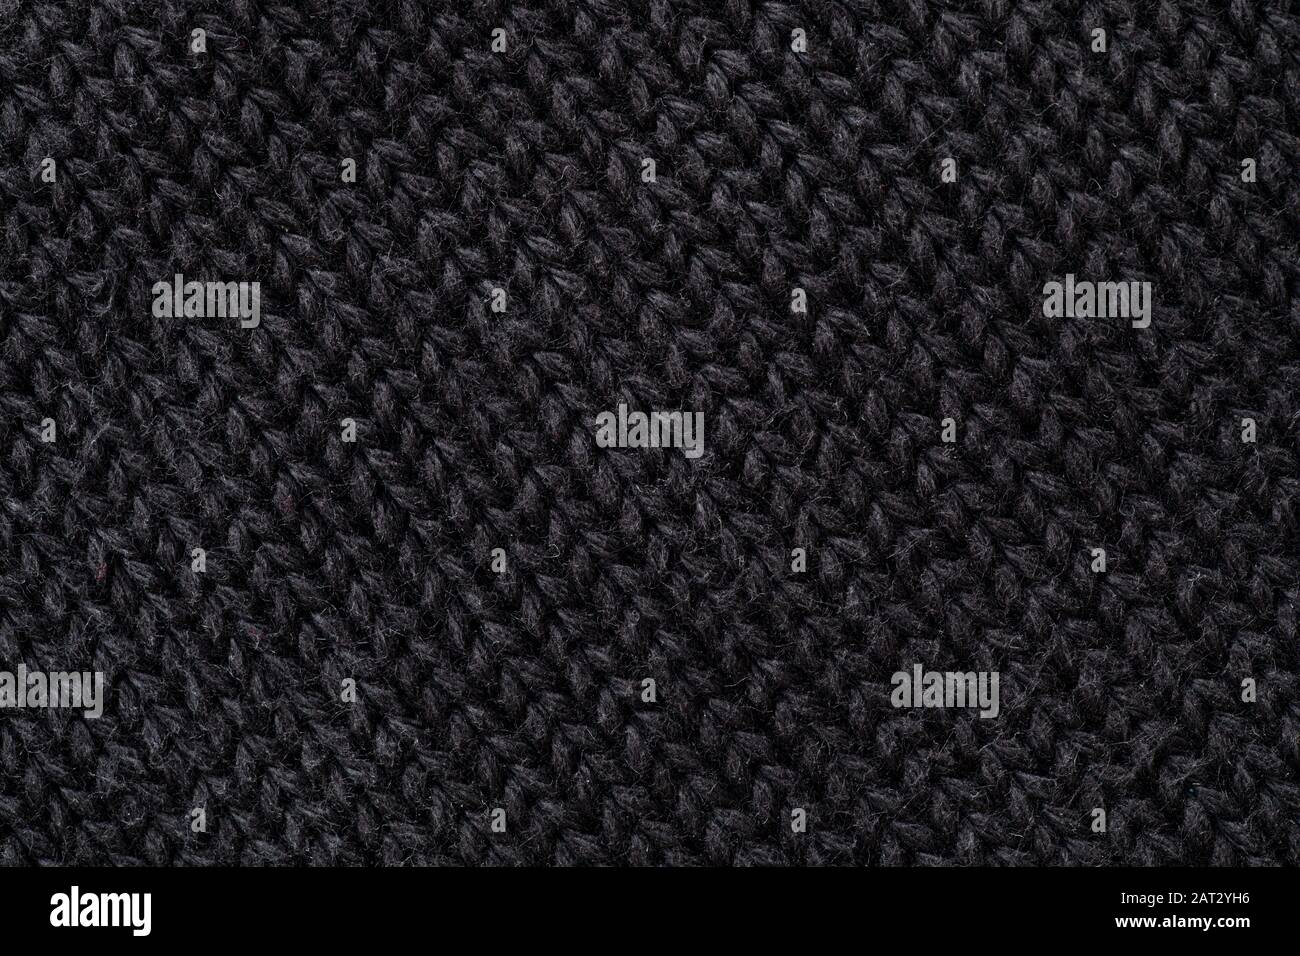 Extreme Close-Up of Black Woolen Texture Stock Photo